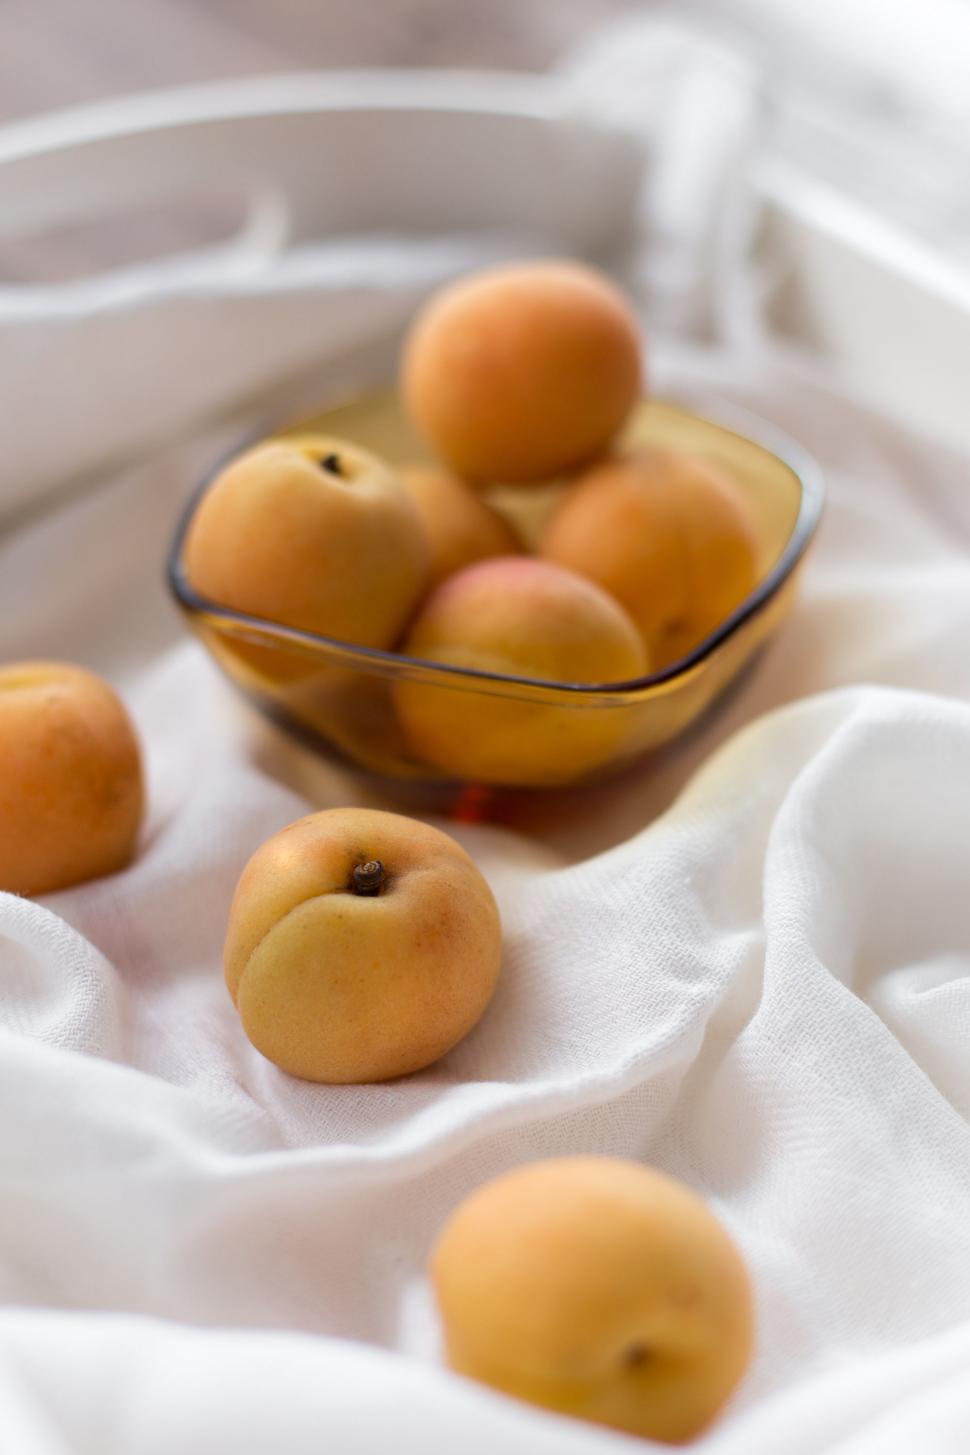 Free Image of A Bowl of Apricots on a White Cloth 